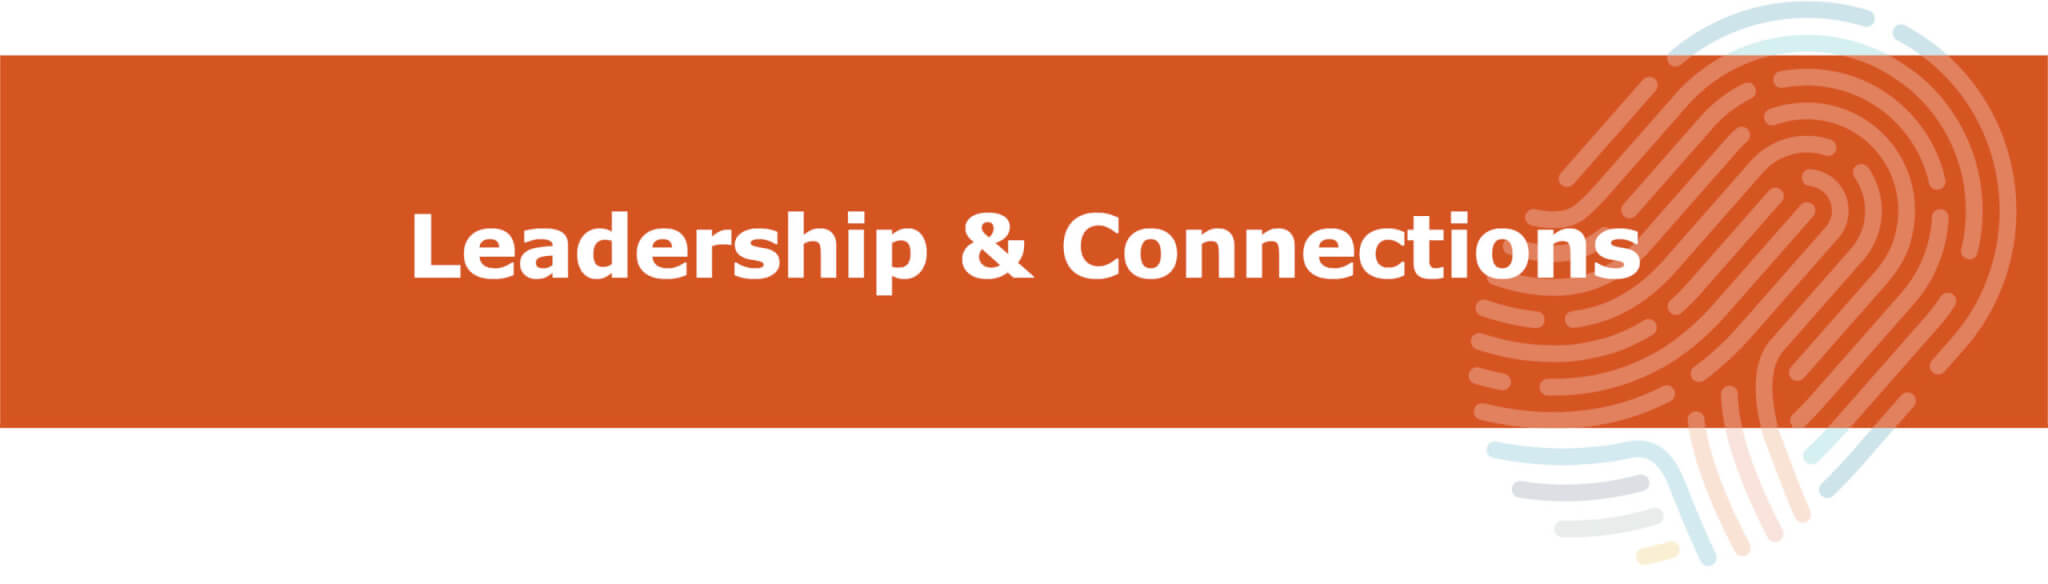 Leadership & Connections Header Graphic